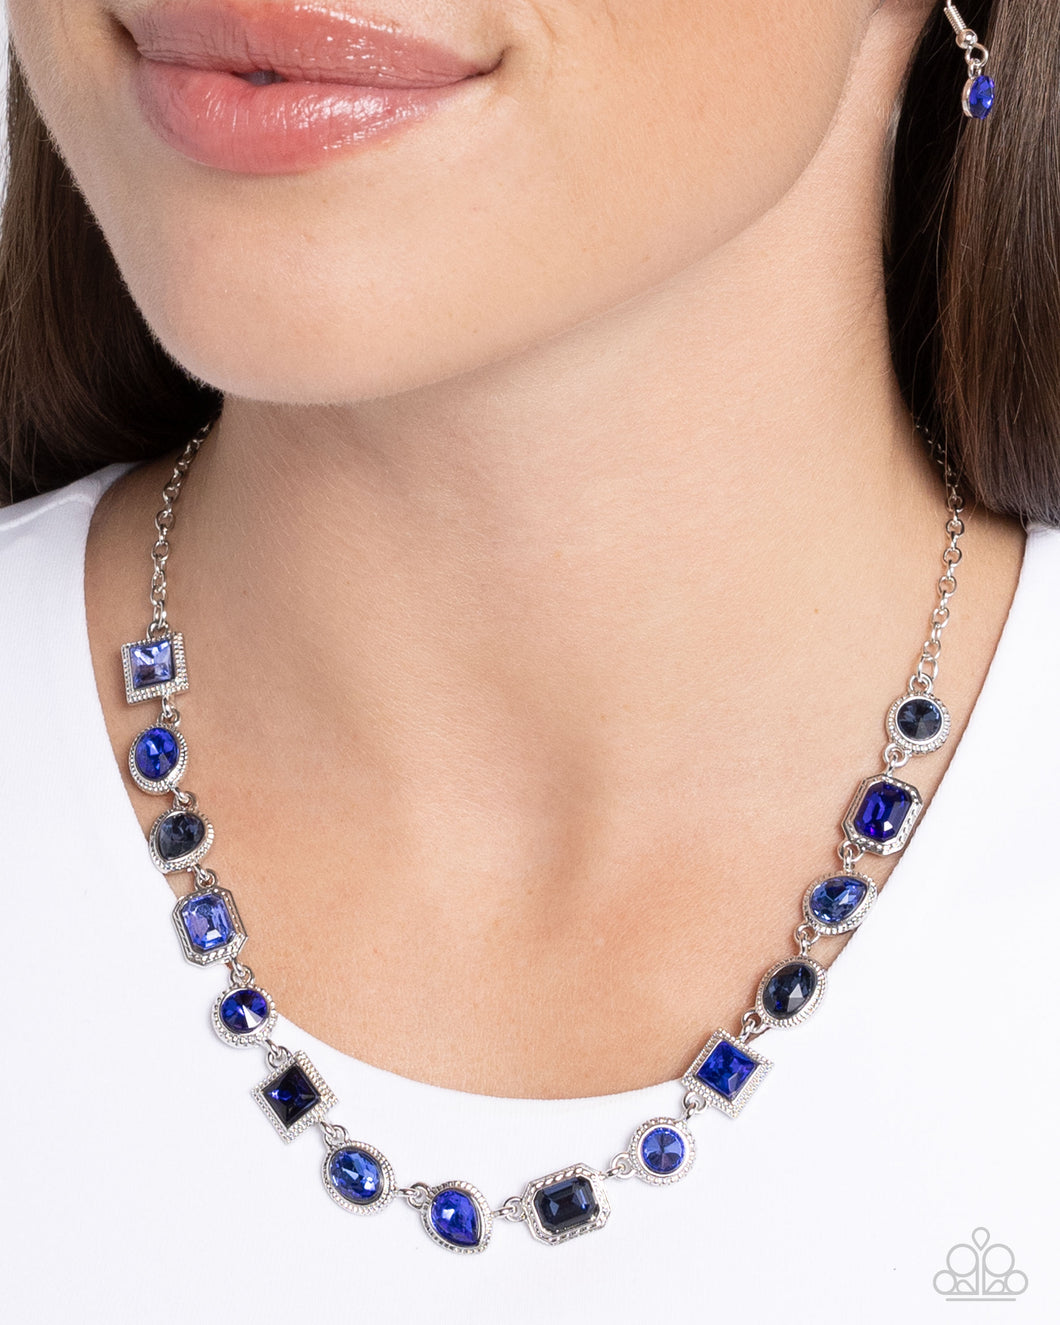 Paparazzi “Gallery Glam” Blue Necklace Earring Set